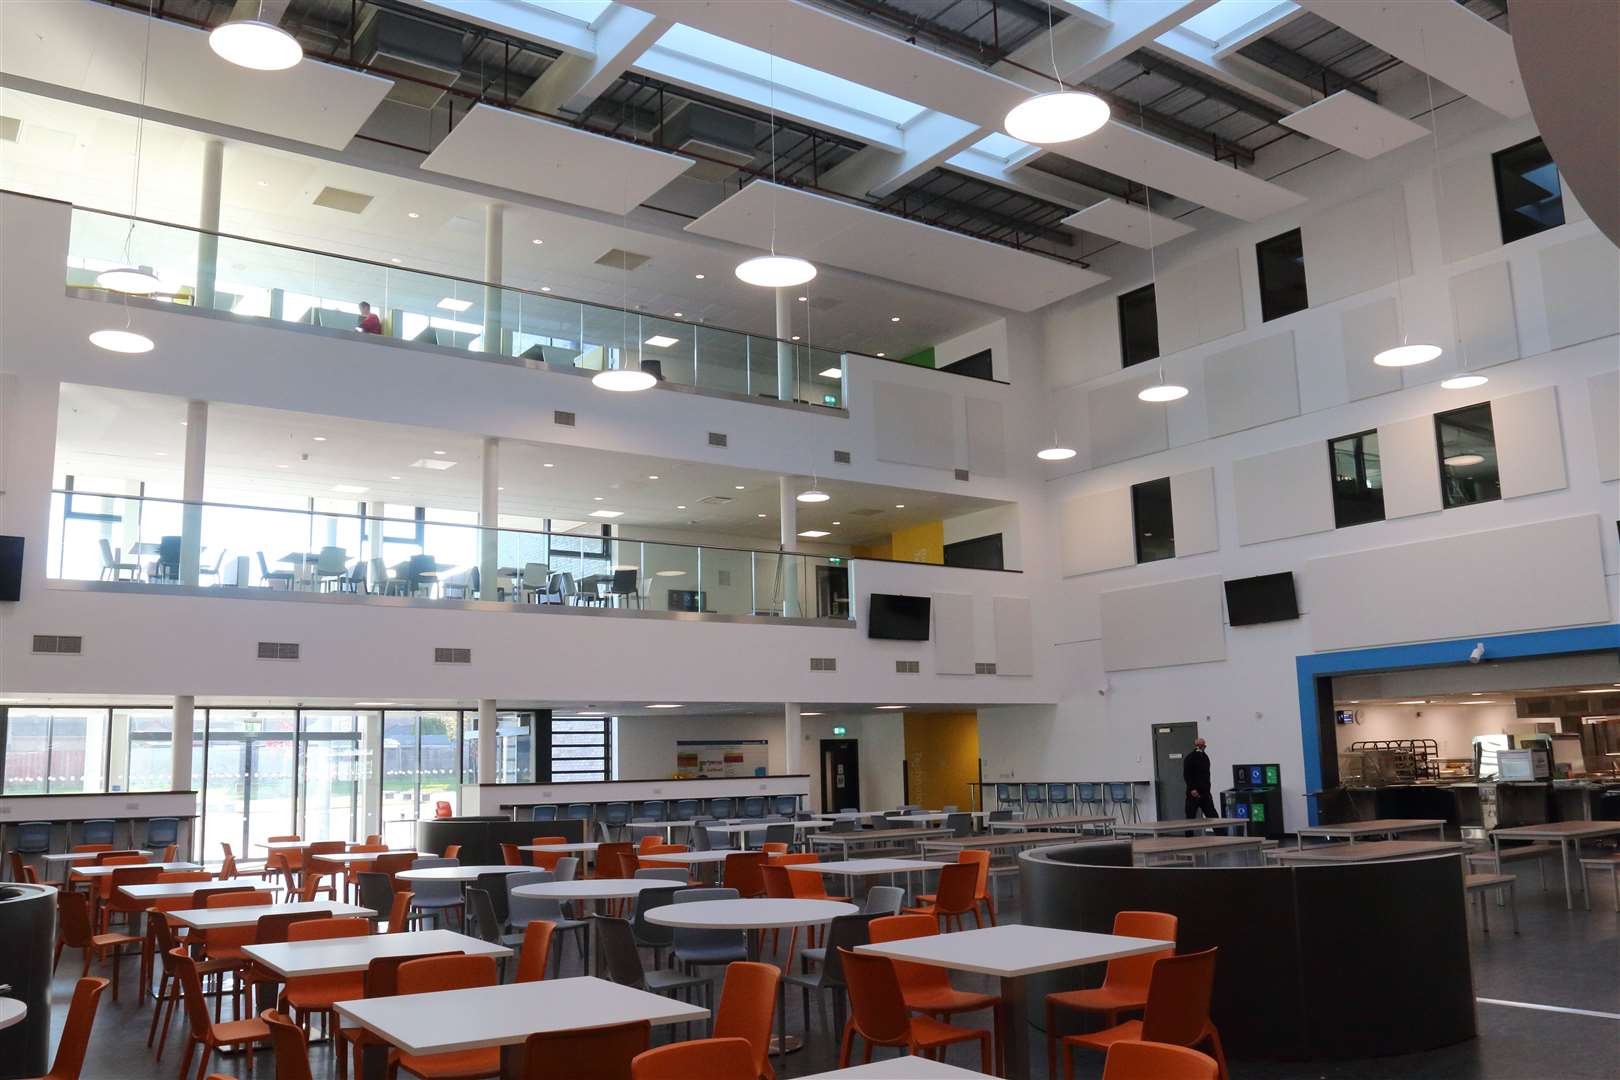 The atrium forms the heart of the new Academy.